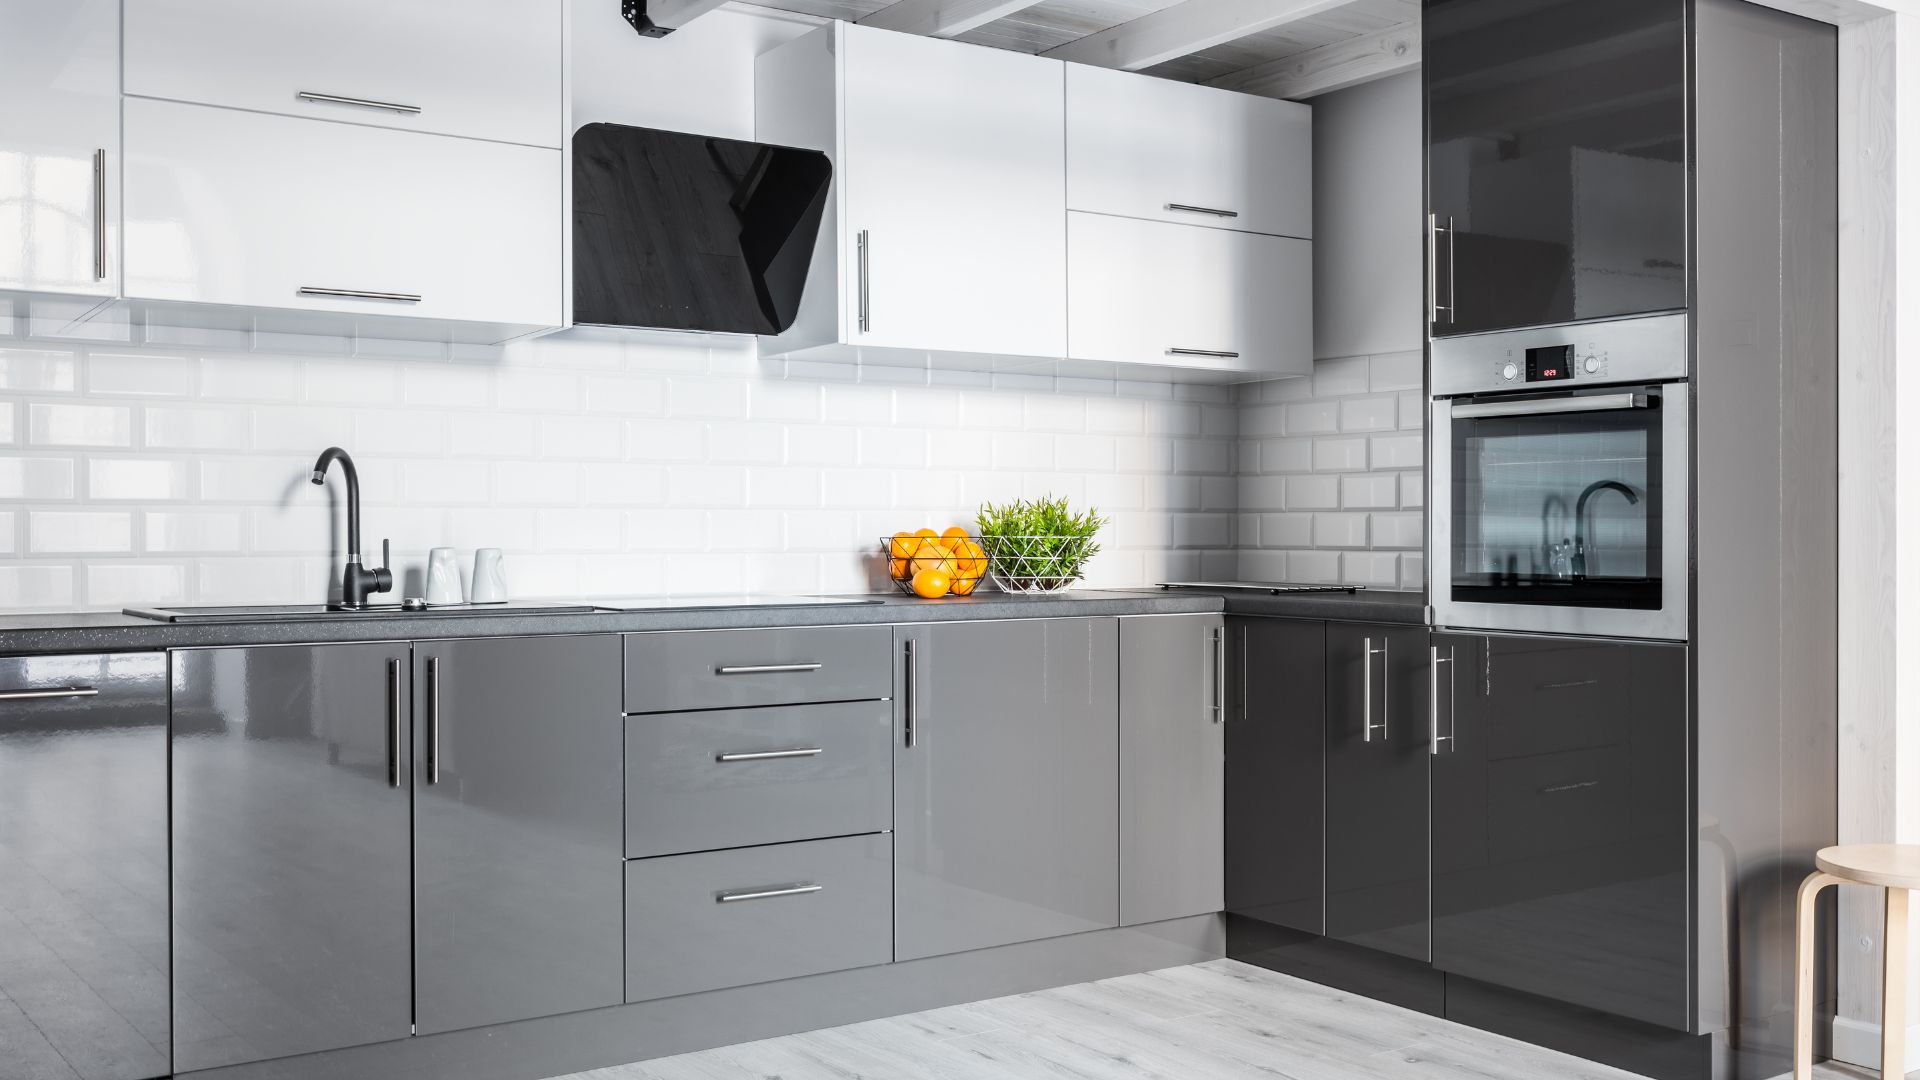 Industrial kitchen style in grey and white cabinets